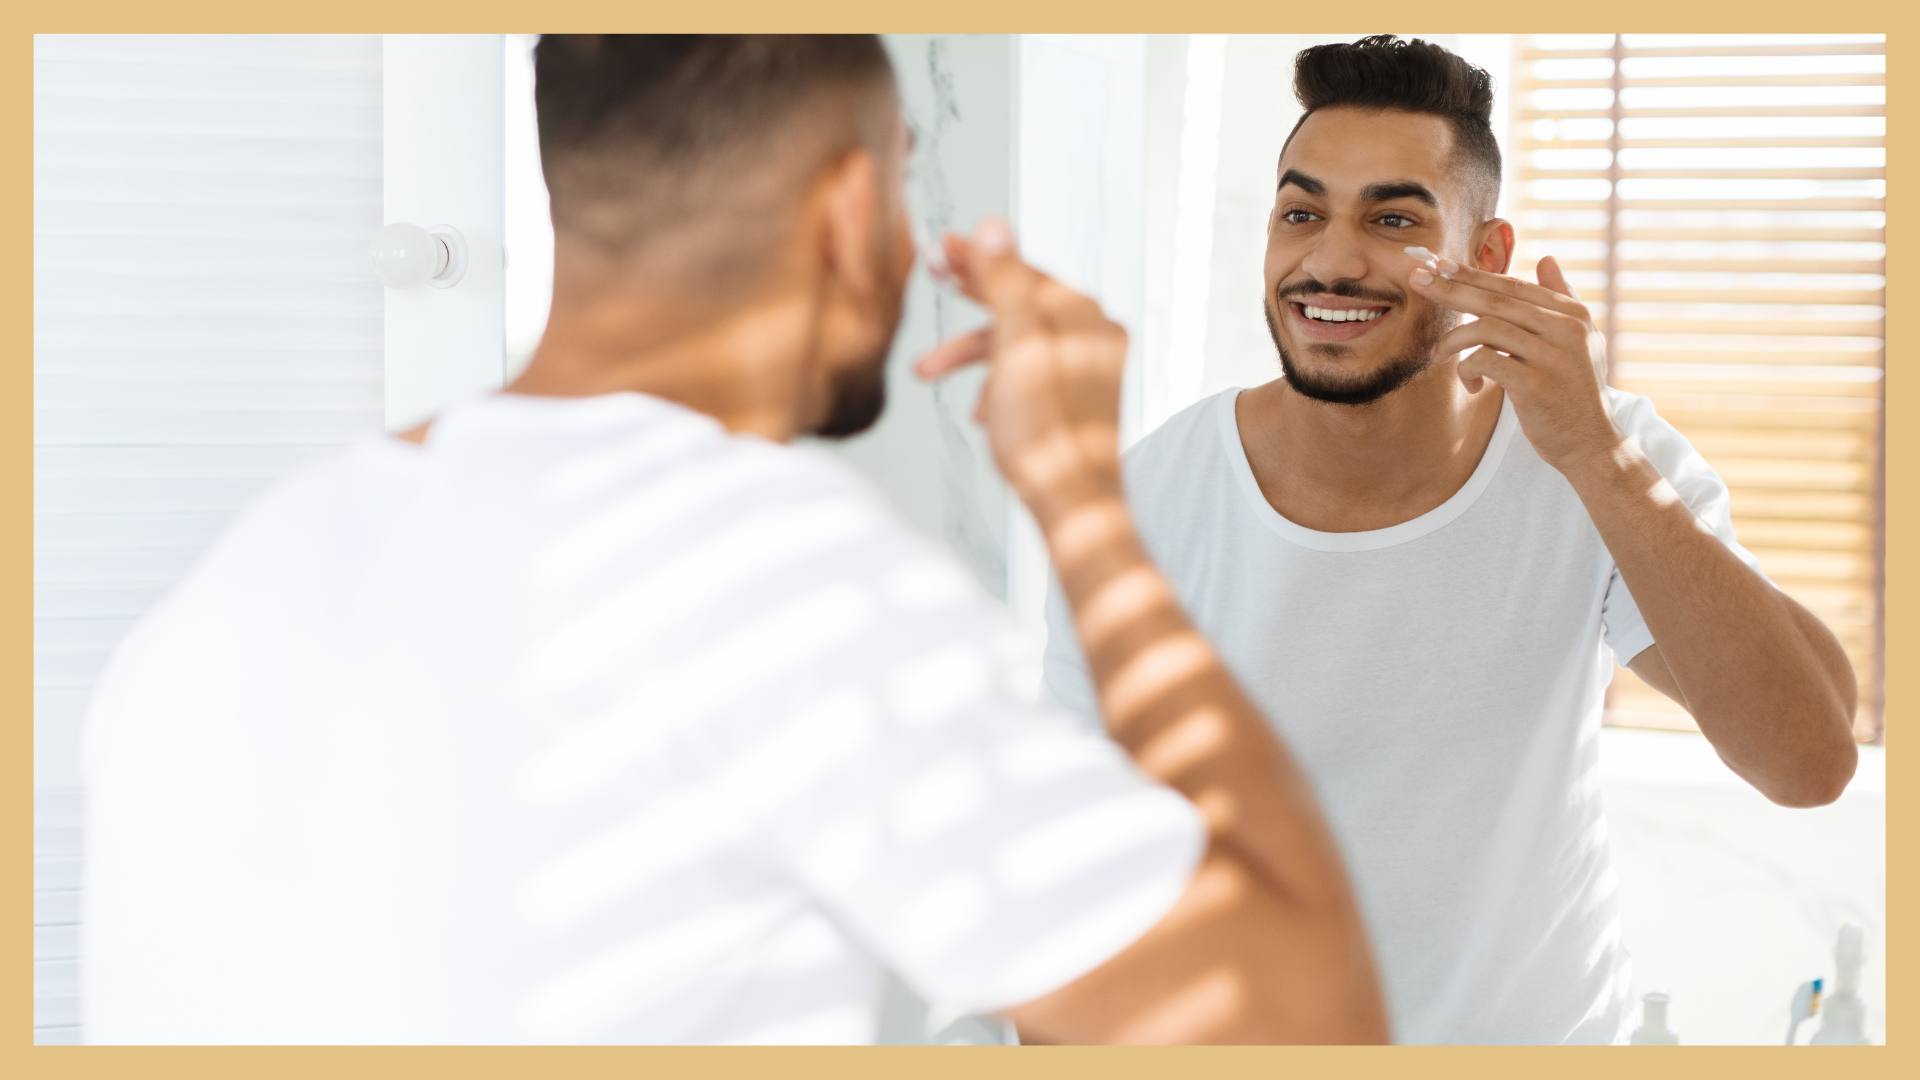 How to Build a Skincare Routine for Men with Sensitive Skin